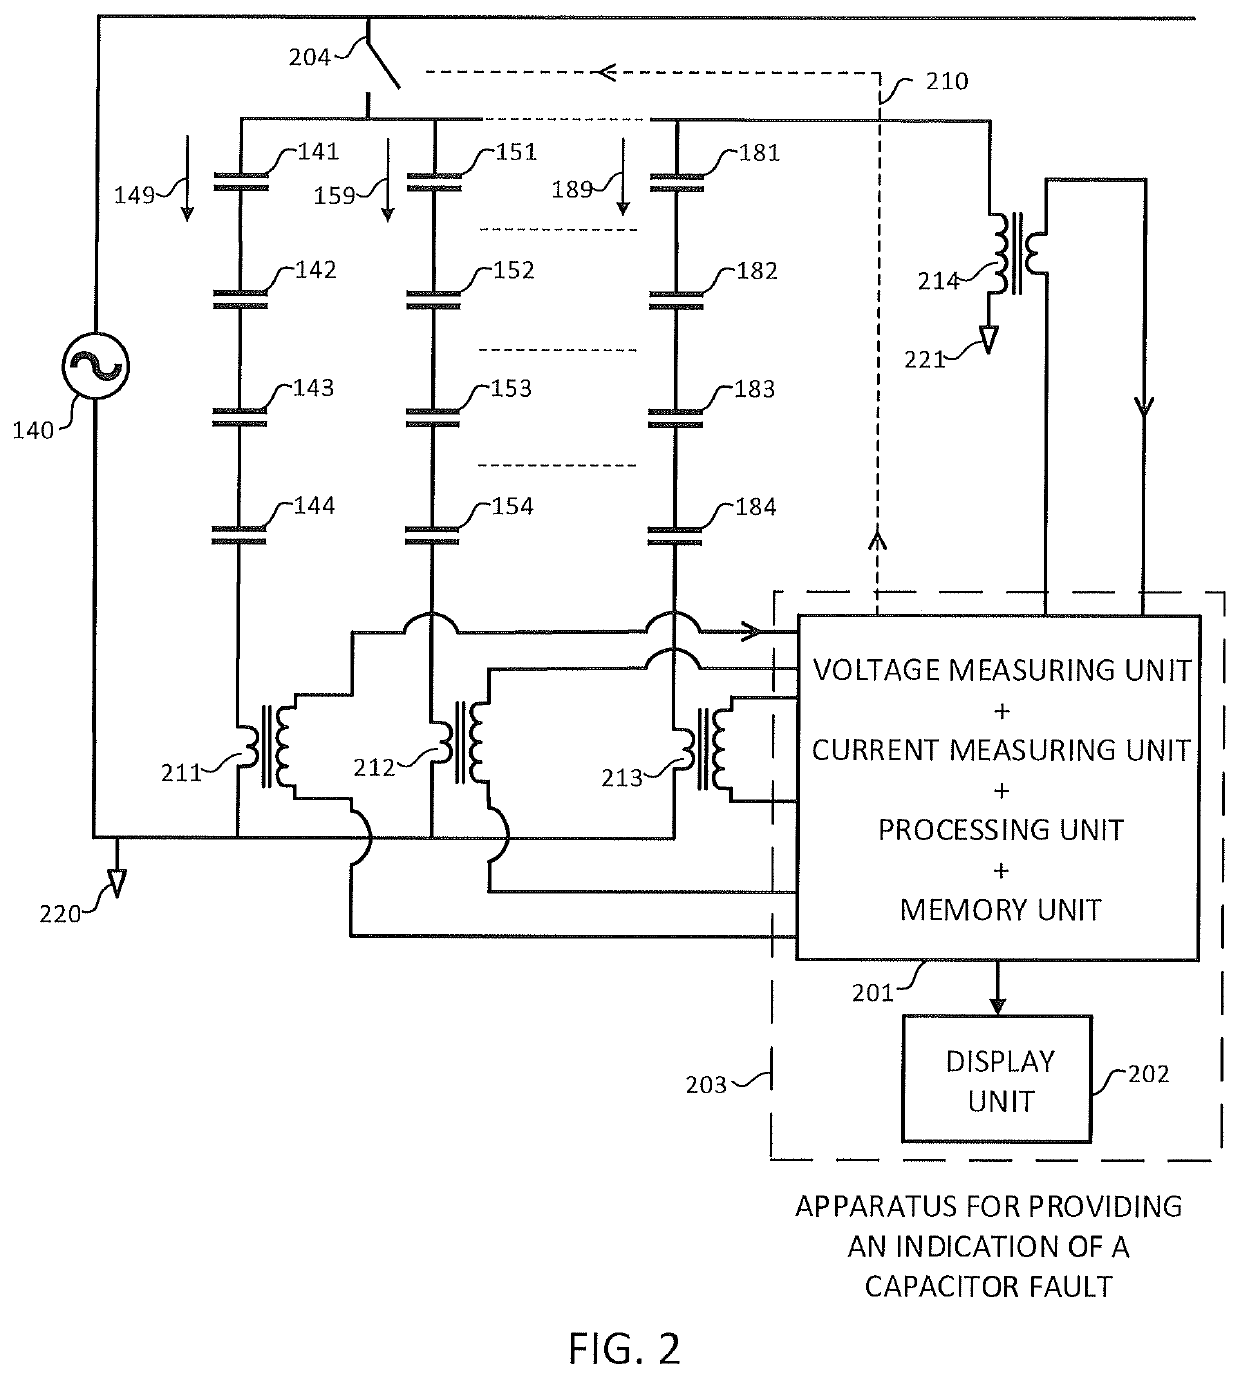 Method and apparatus for monitoring capacitor faults in a capacitor bank